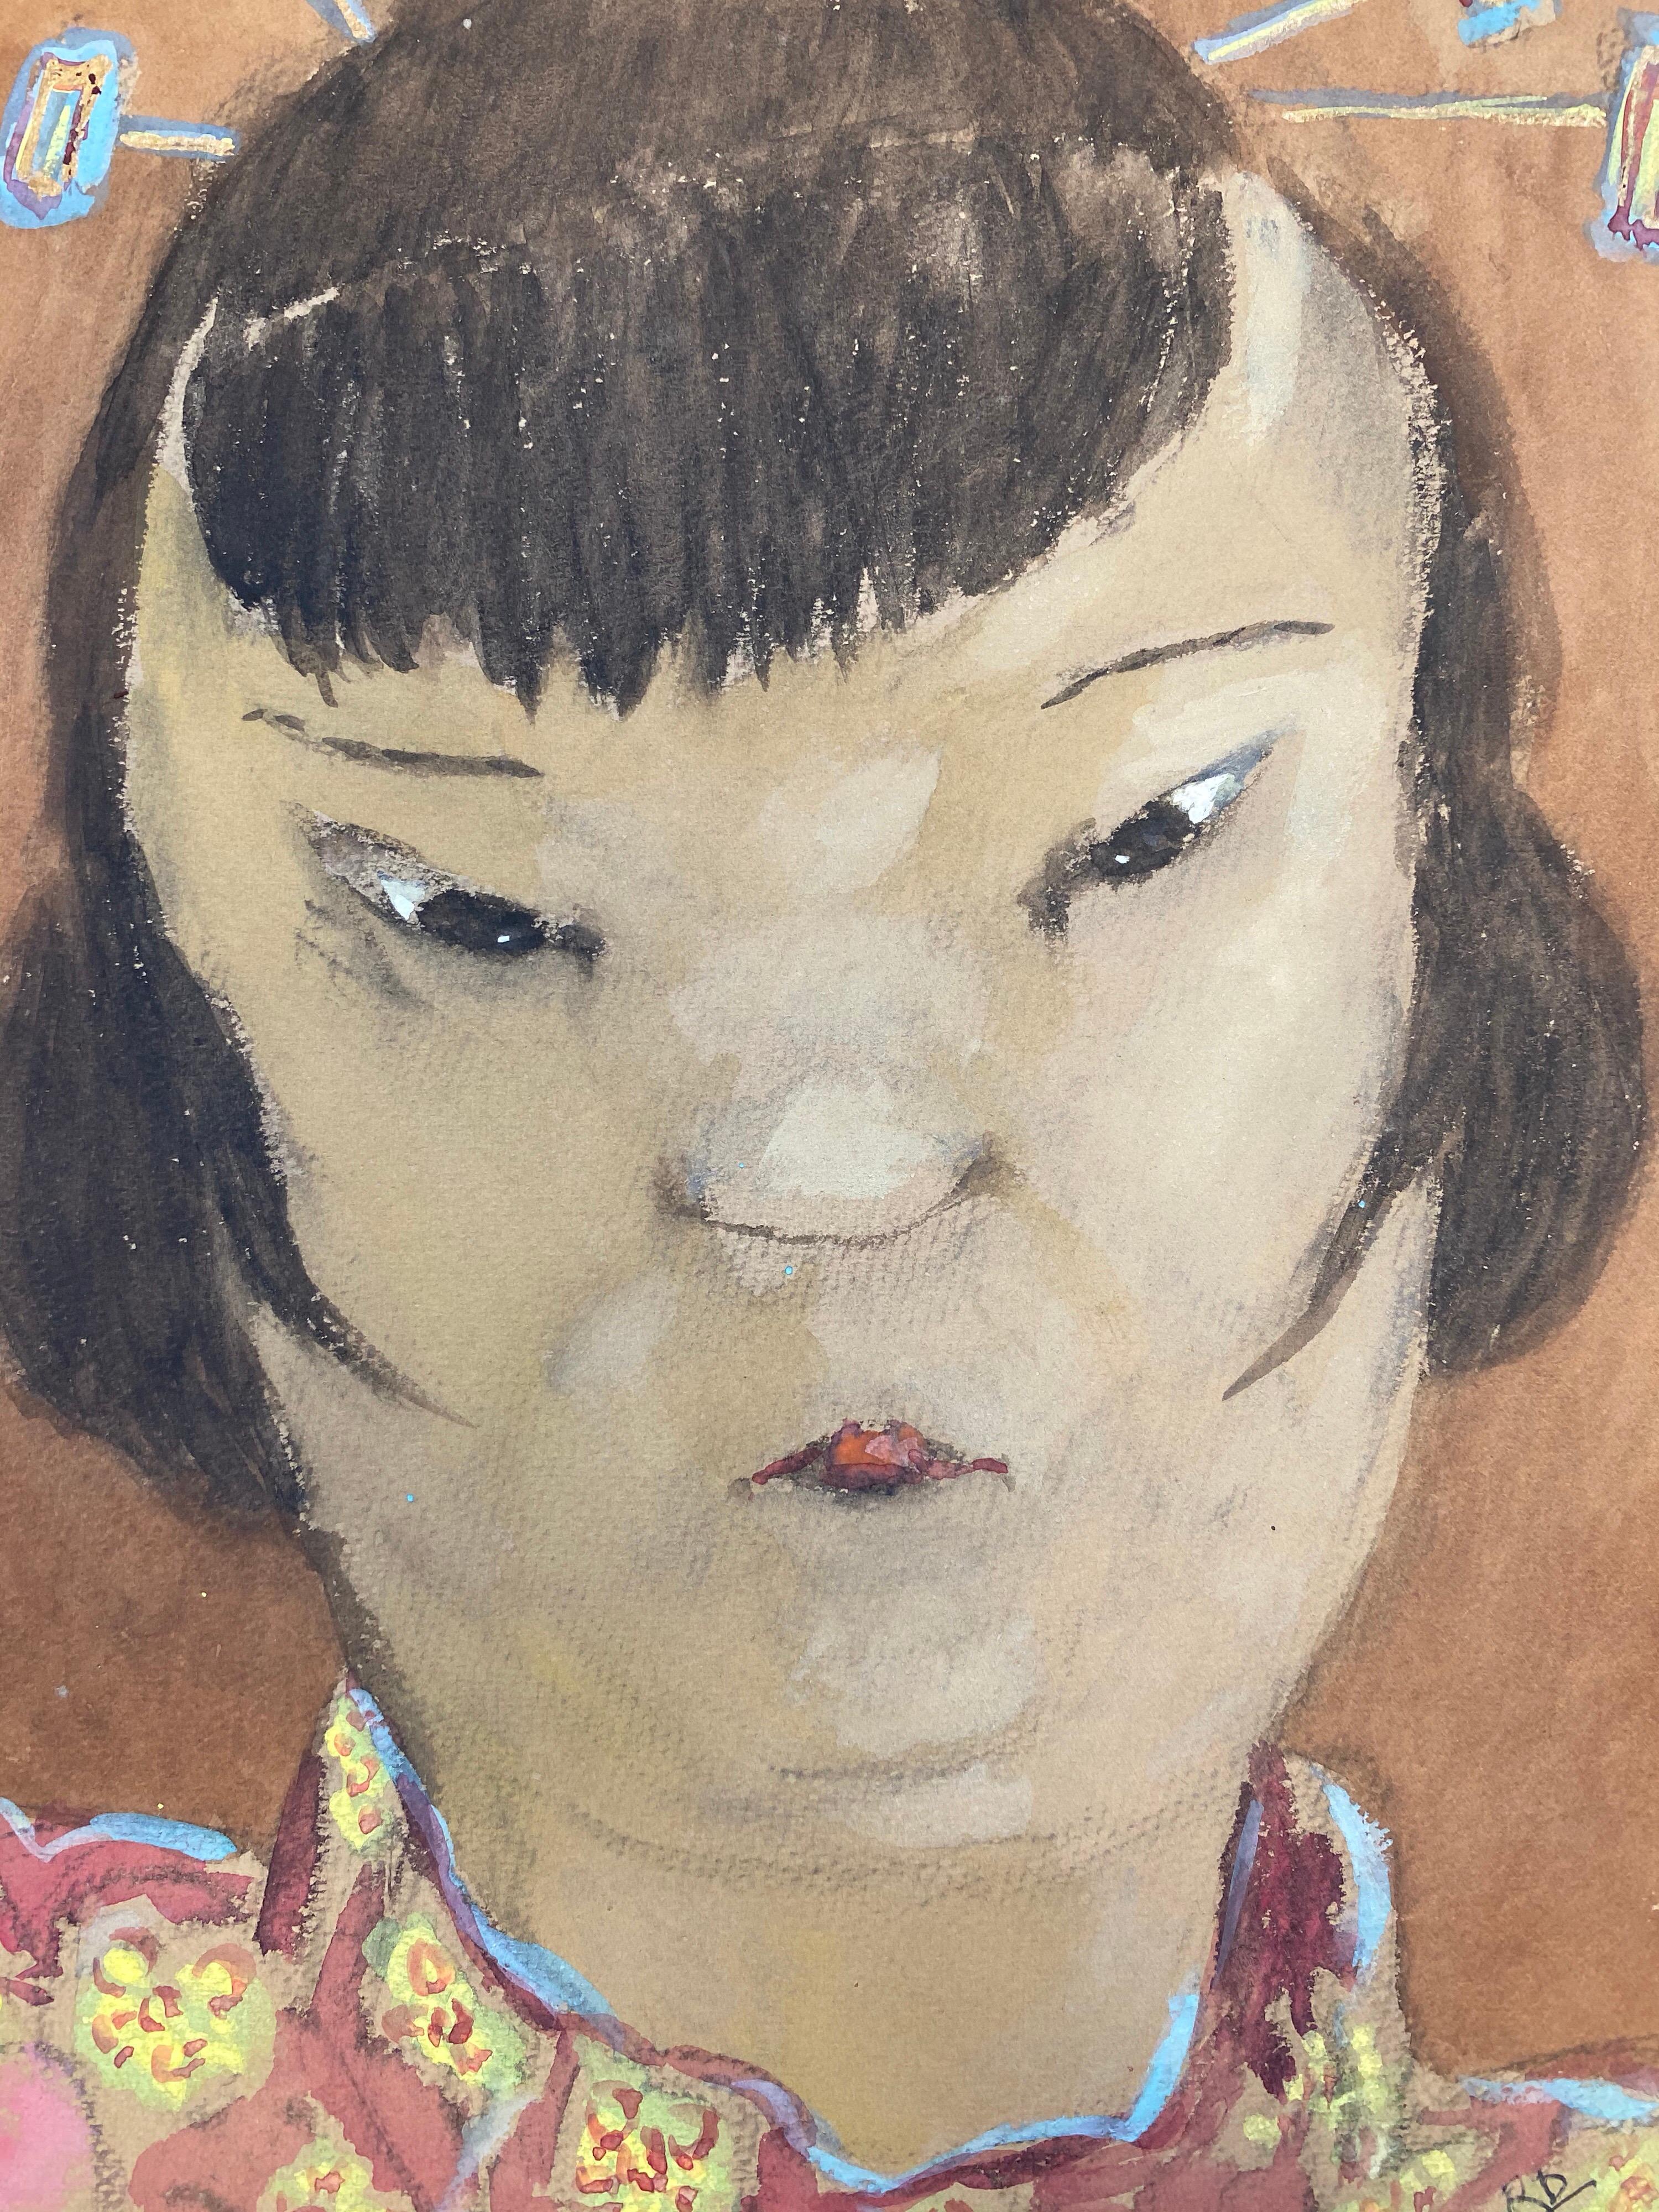 French character portrait.
French school, mid-20th century.
Gouache paint on unframed paper.
signed lower corner.
Image : 12.75 x 9.5 inches.



Superbly decorative 1960's French portrait painting. Ideal for many interiors! So stylish and